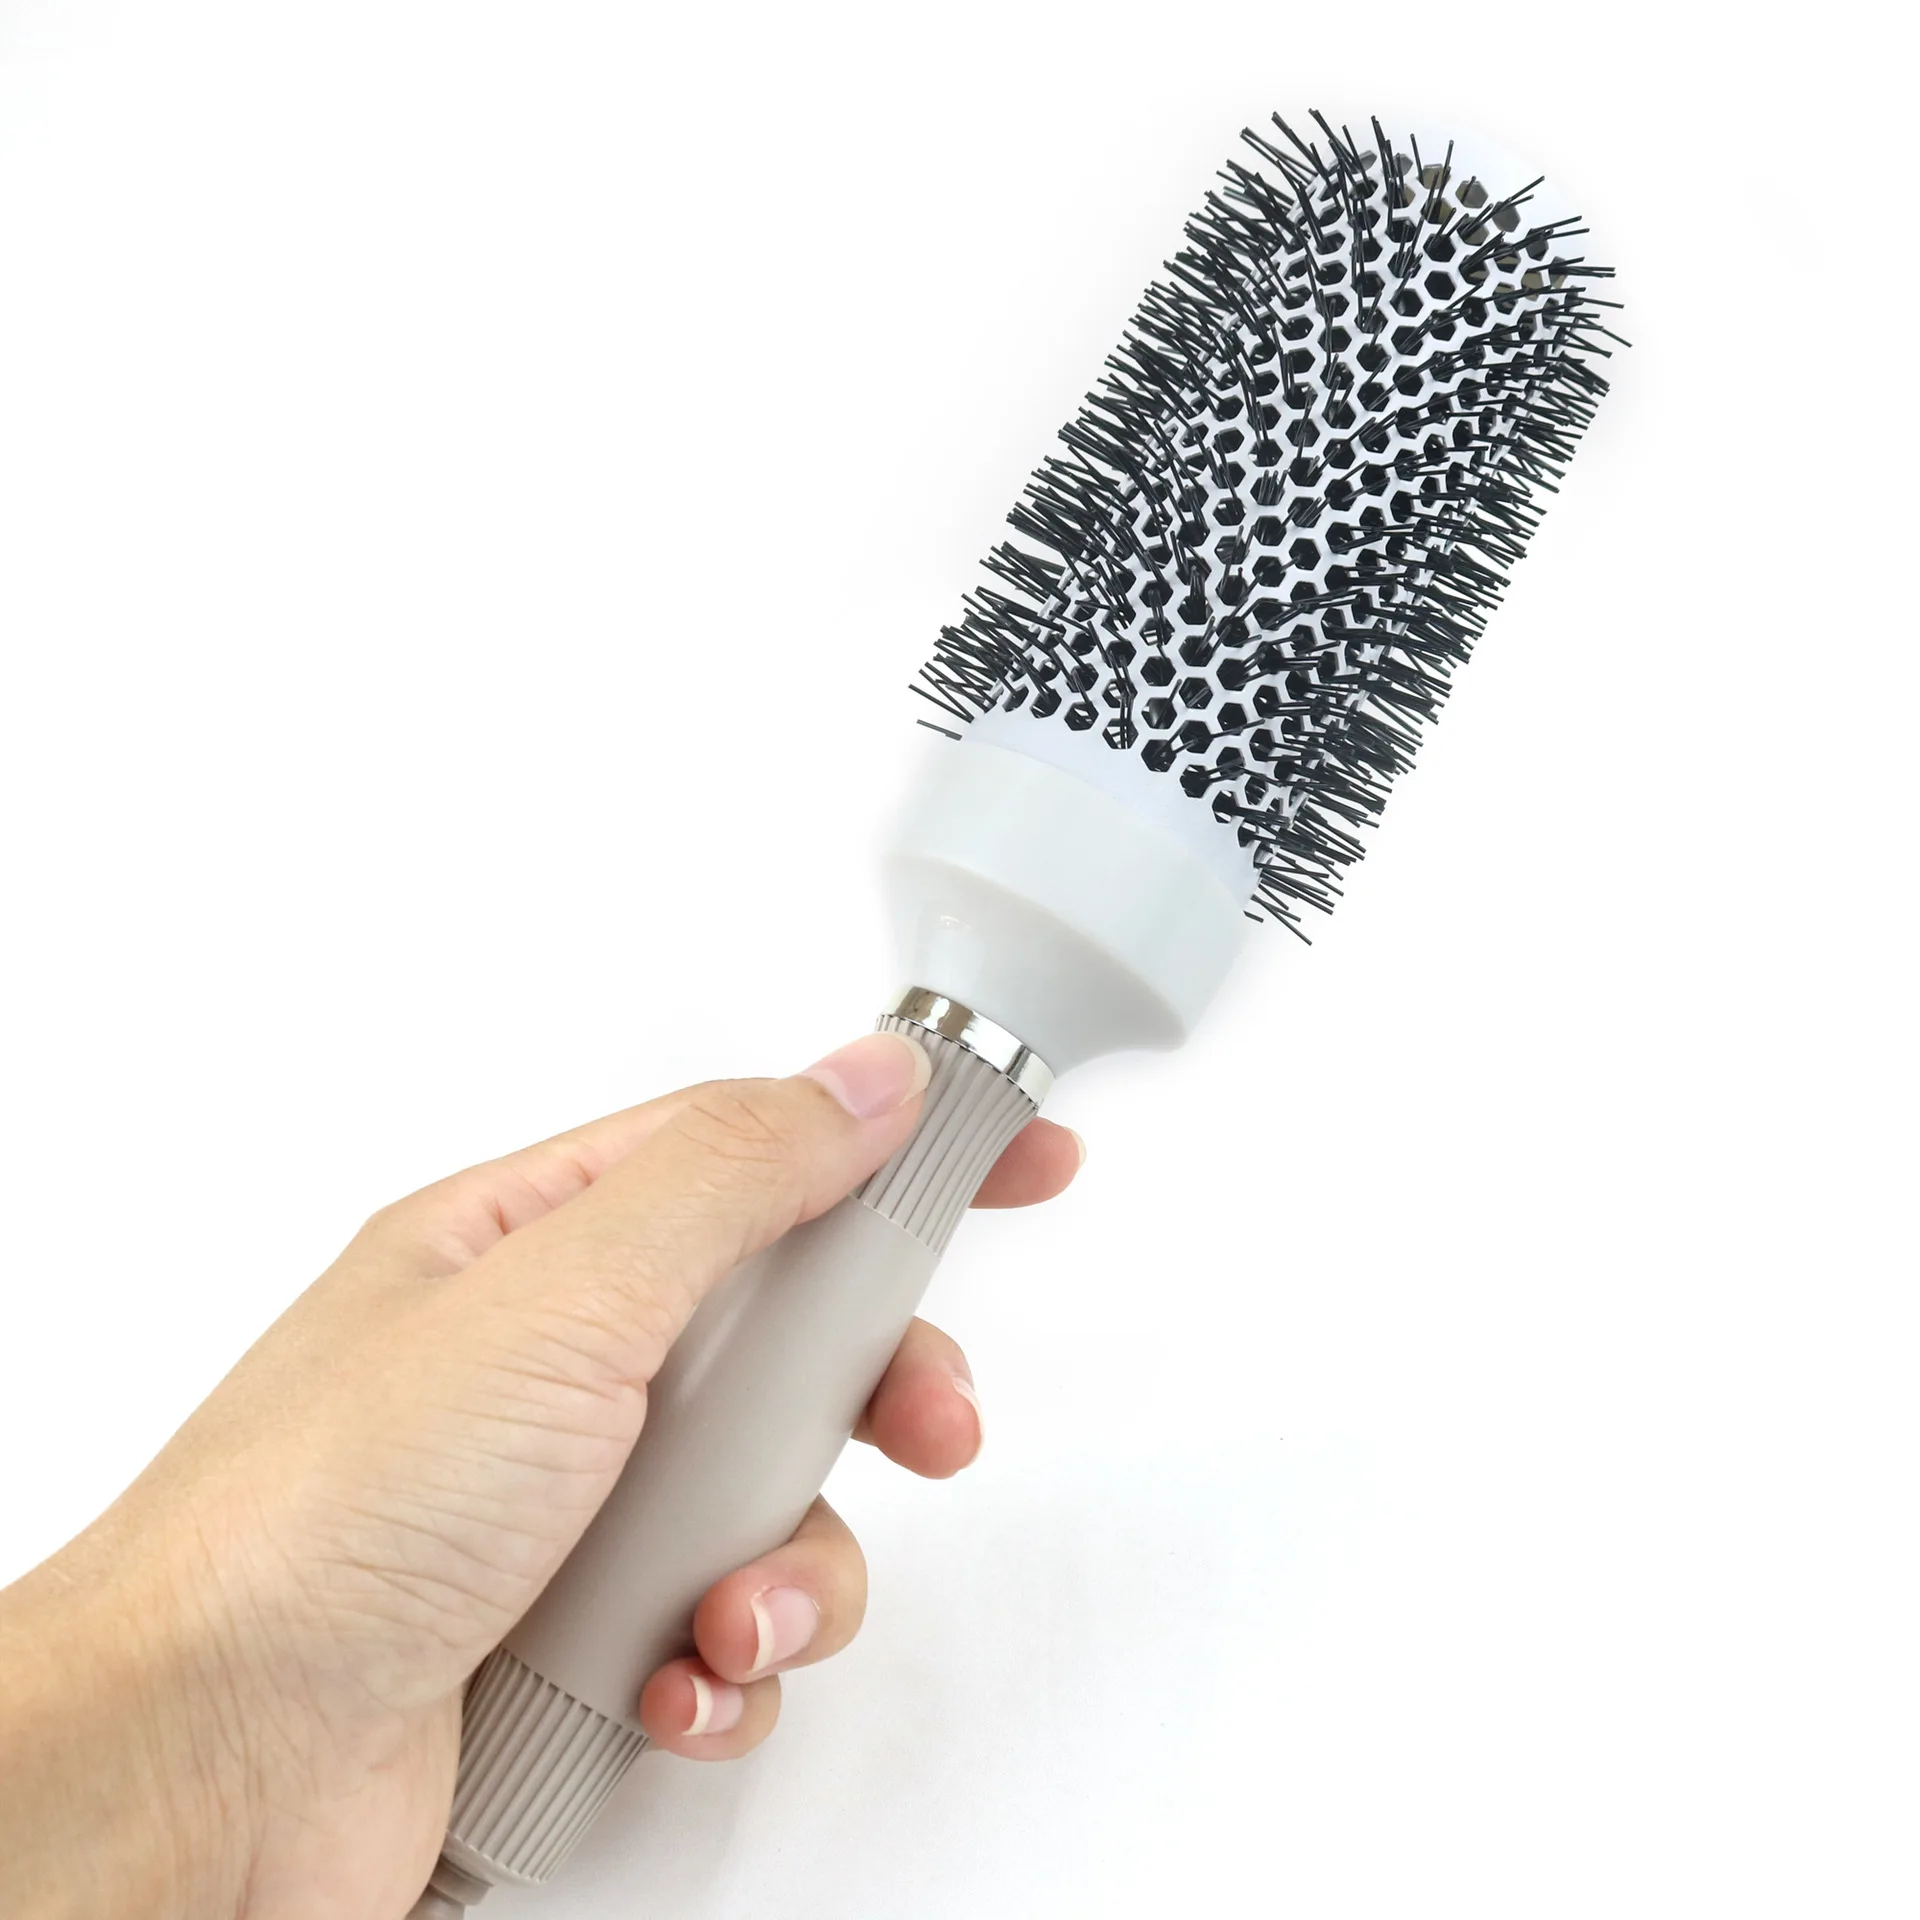 

yue New Styles Hair Brush Nano Hairbrush Thermal Ceramic Ion Round Barrel Comb Hairdressing Hair Salon Styling Drying Curling